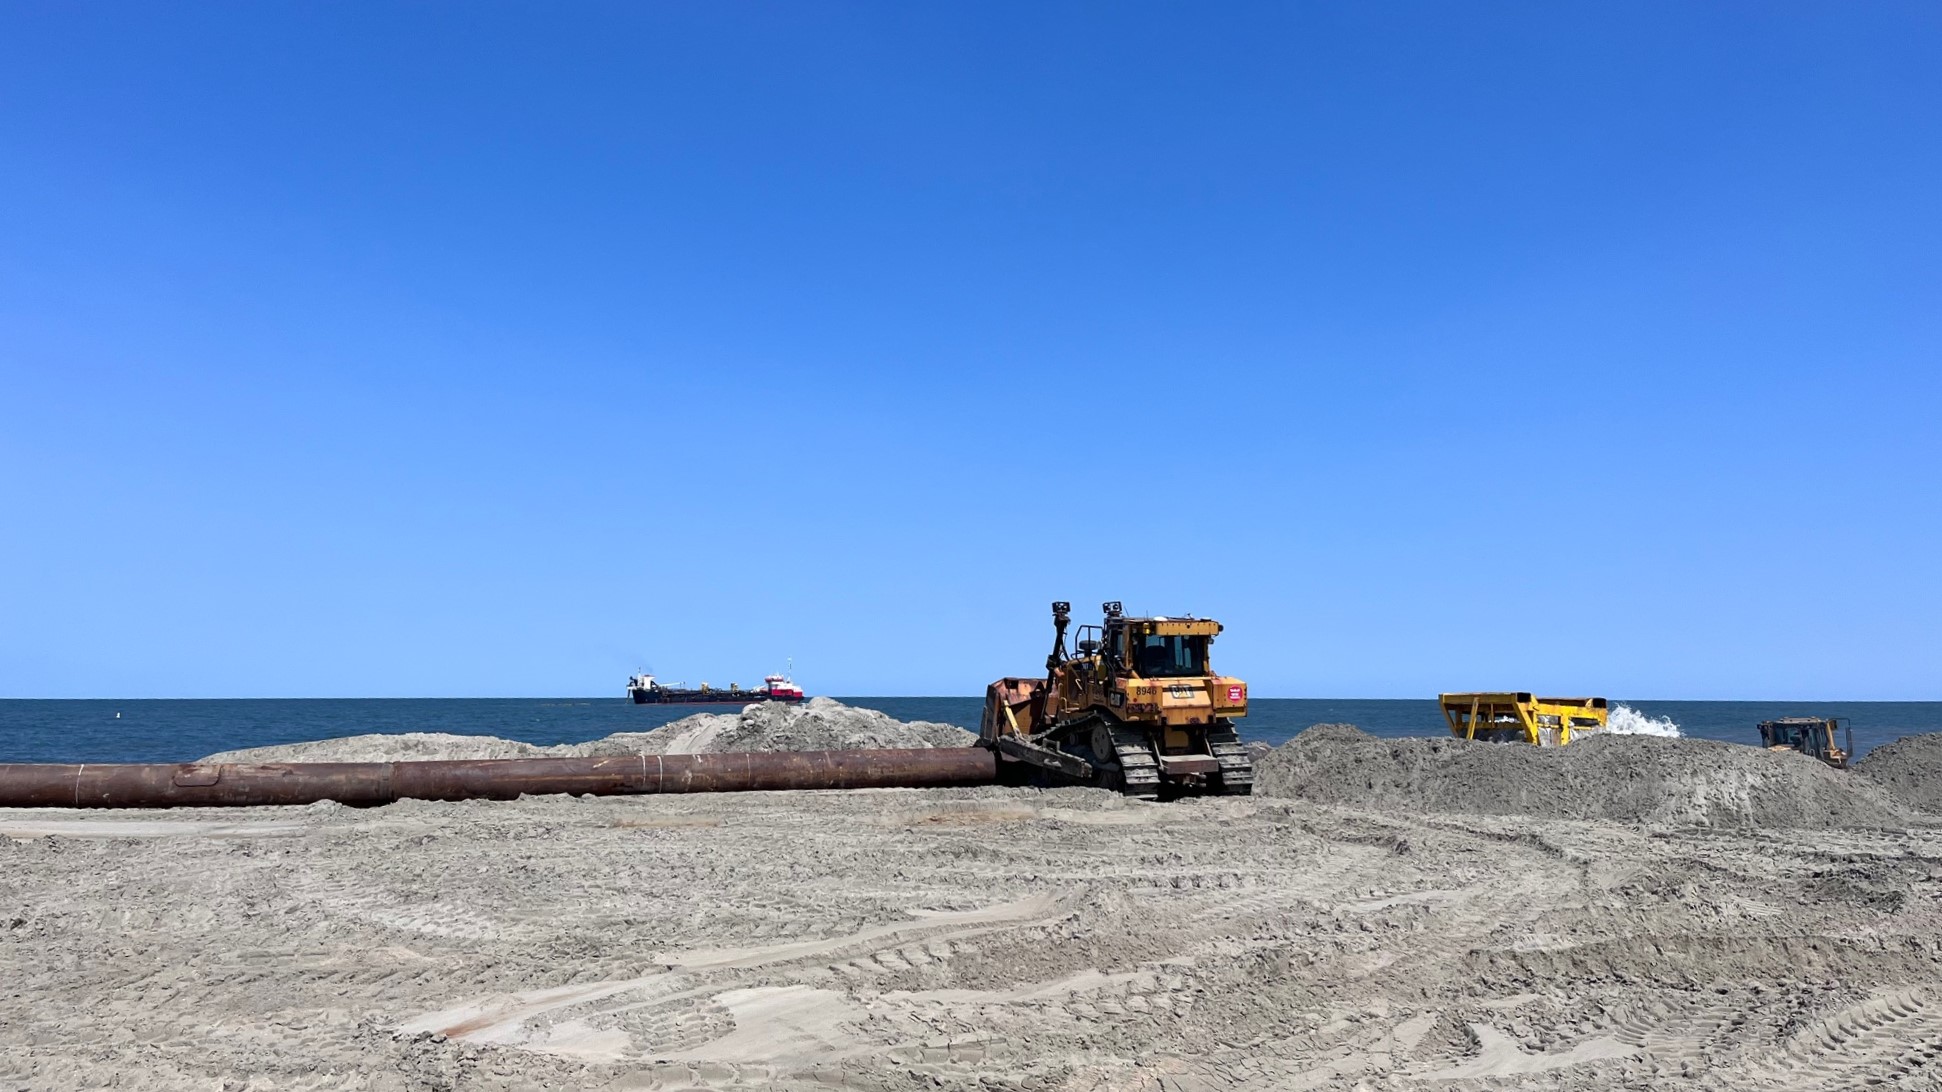 A bulldozer and other heavy equipment move sand that has been pumped onto a beach from a dredge seen floating on the ocean in the distance.